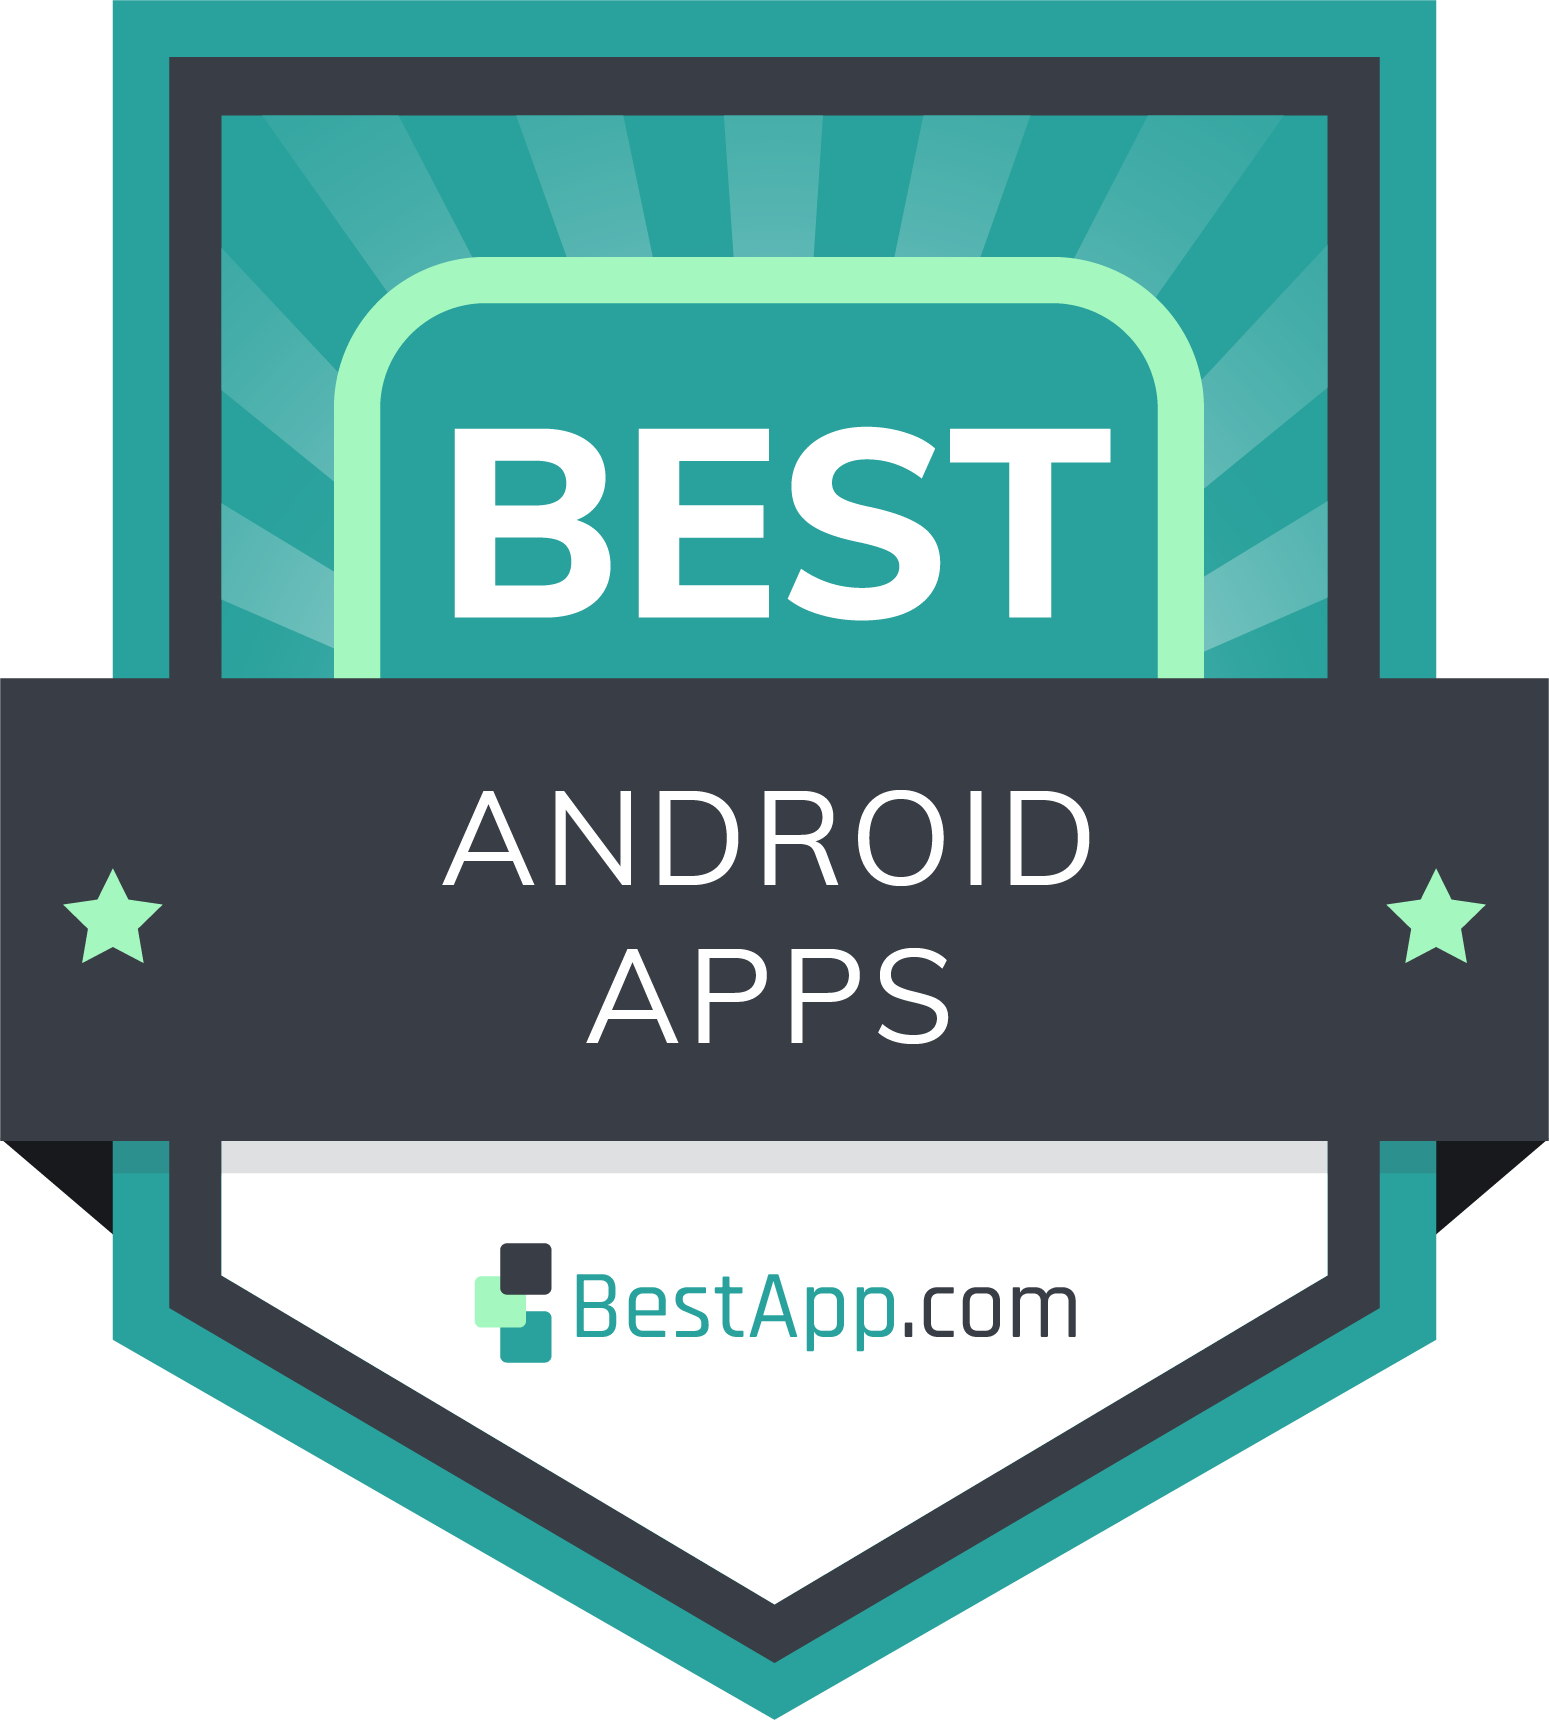 Best Android Apps Badge